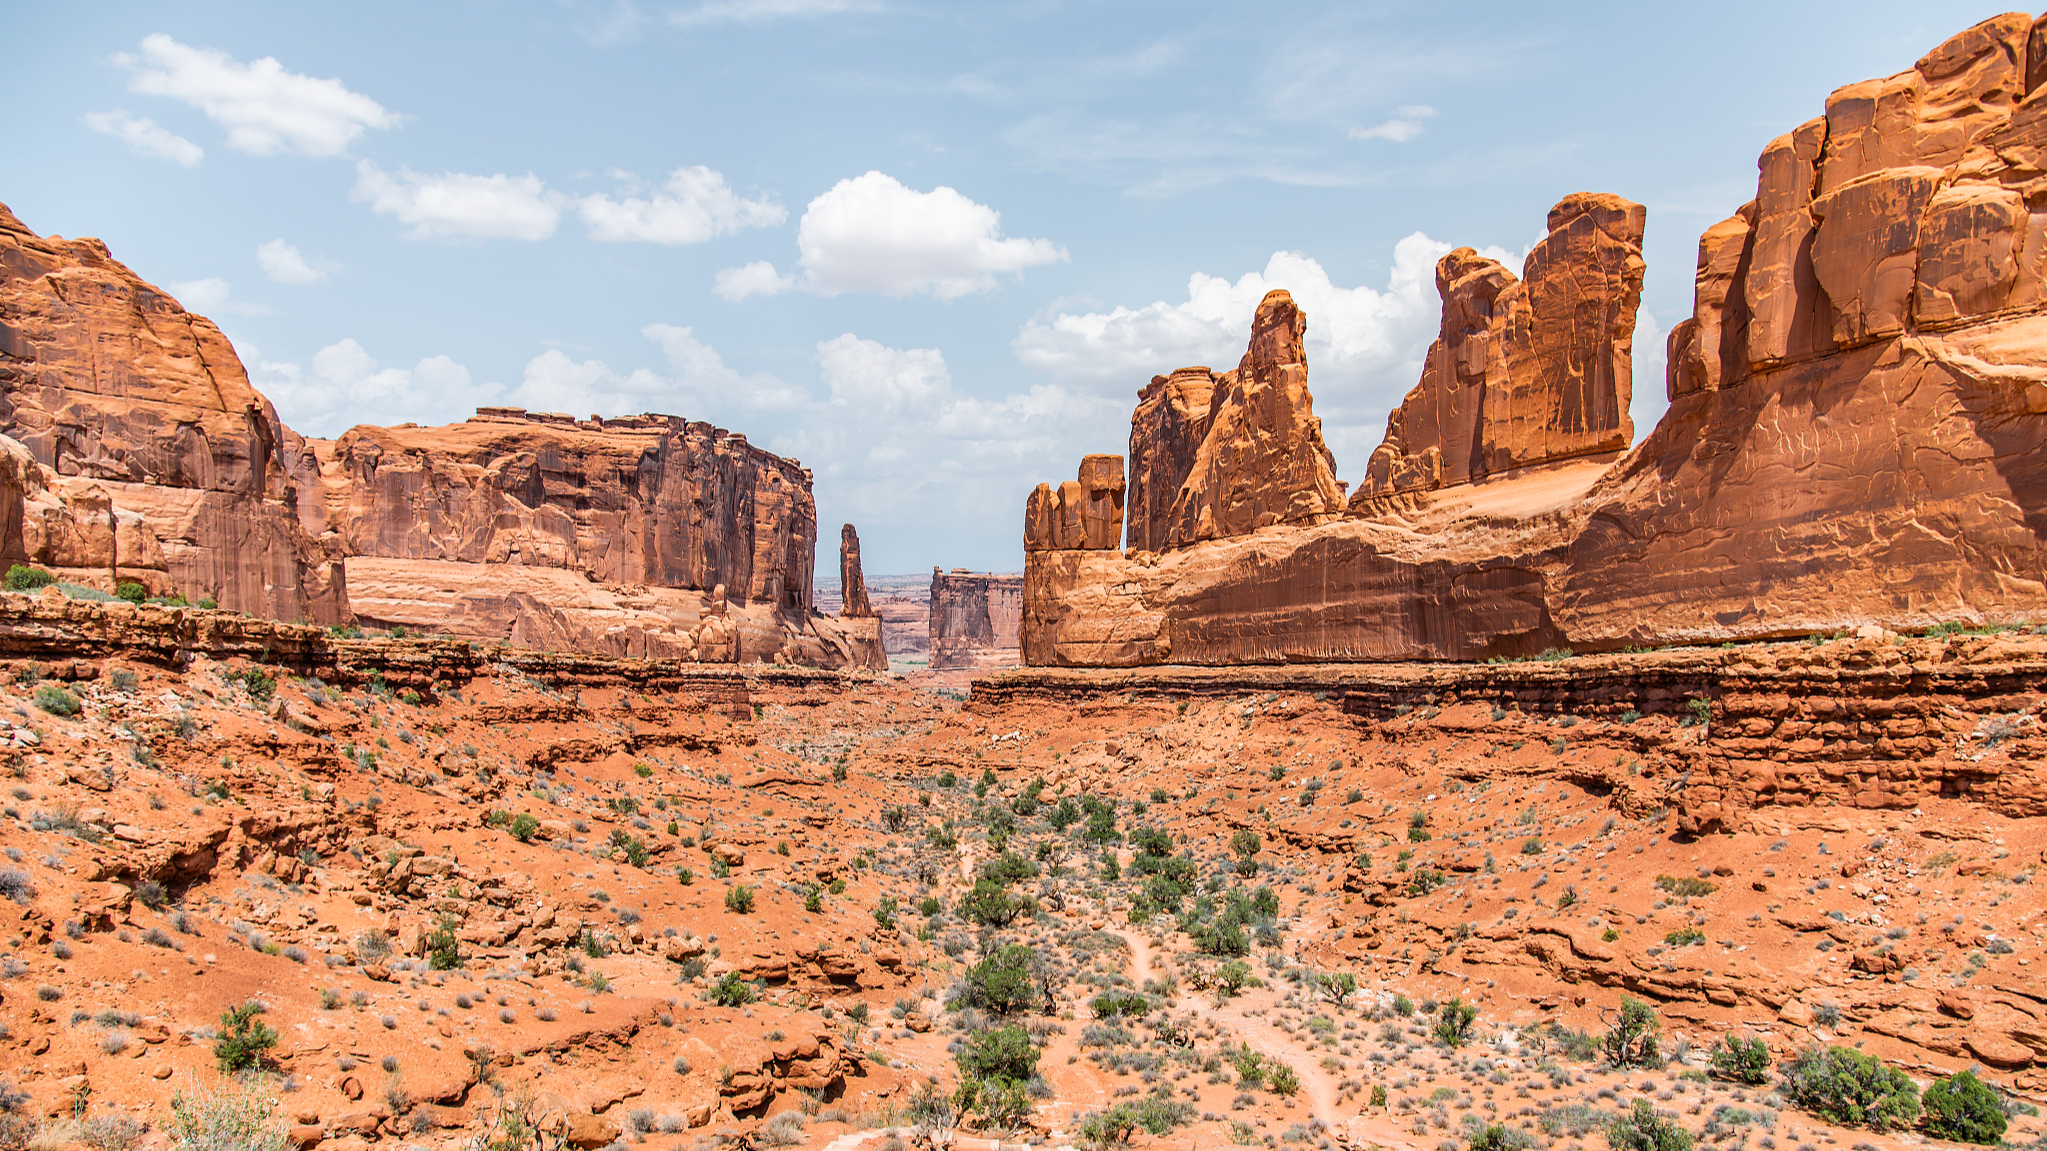 Canyonlands National Park in the western U.S. state of Utah. /VCG